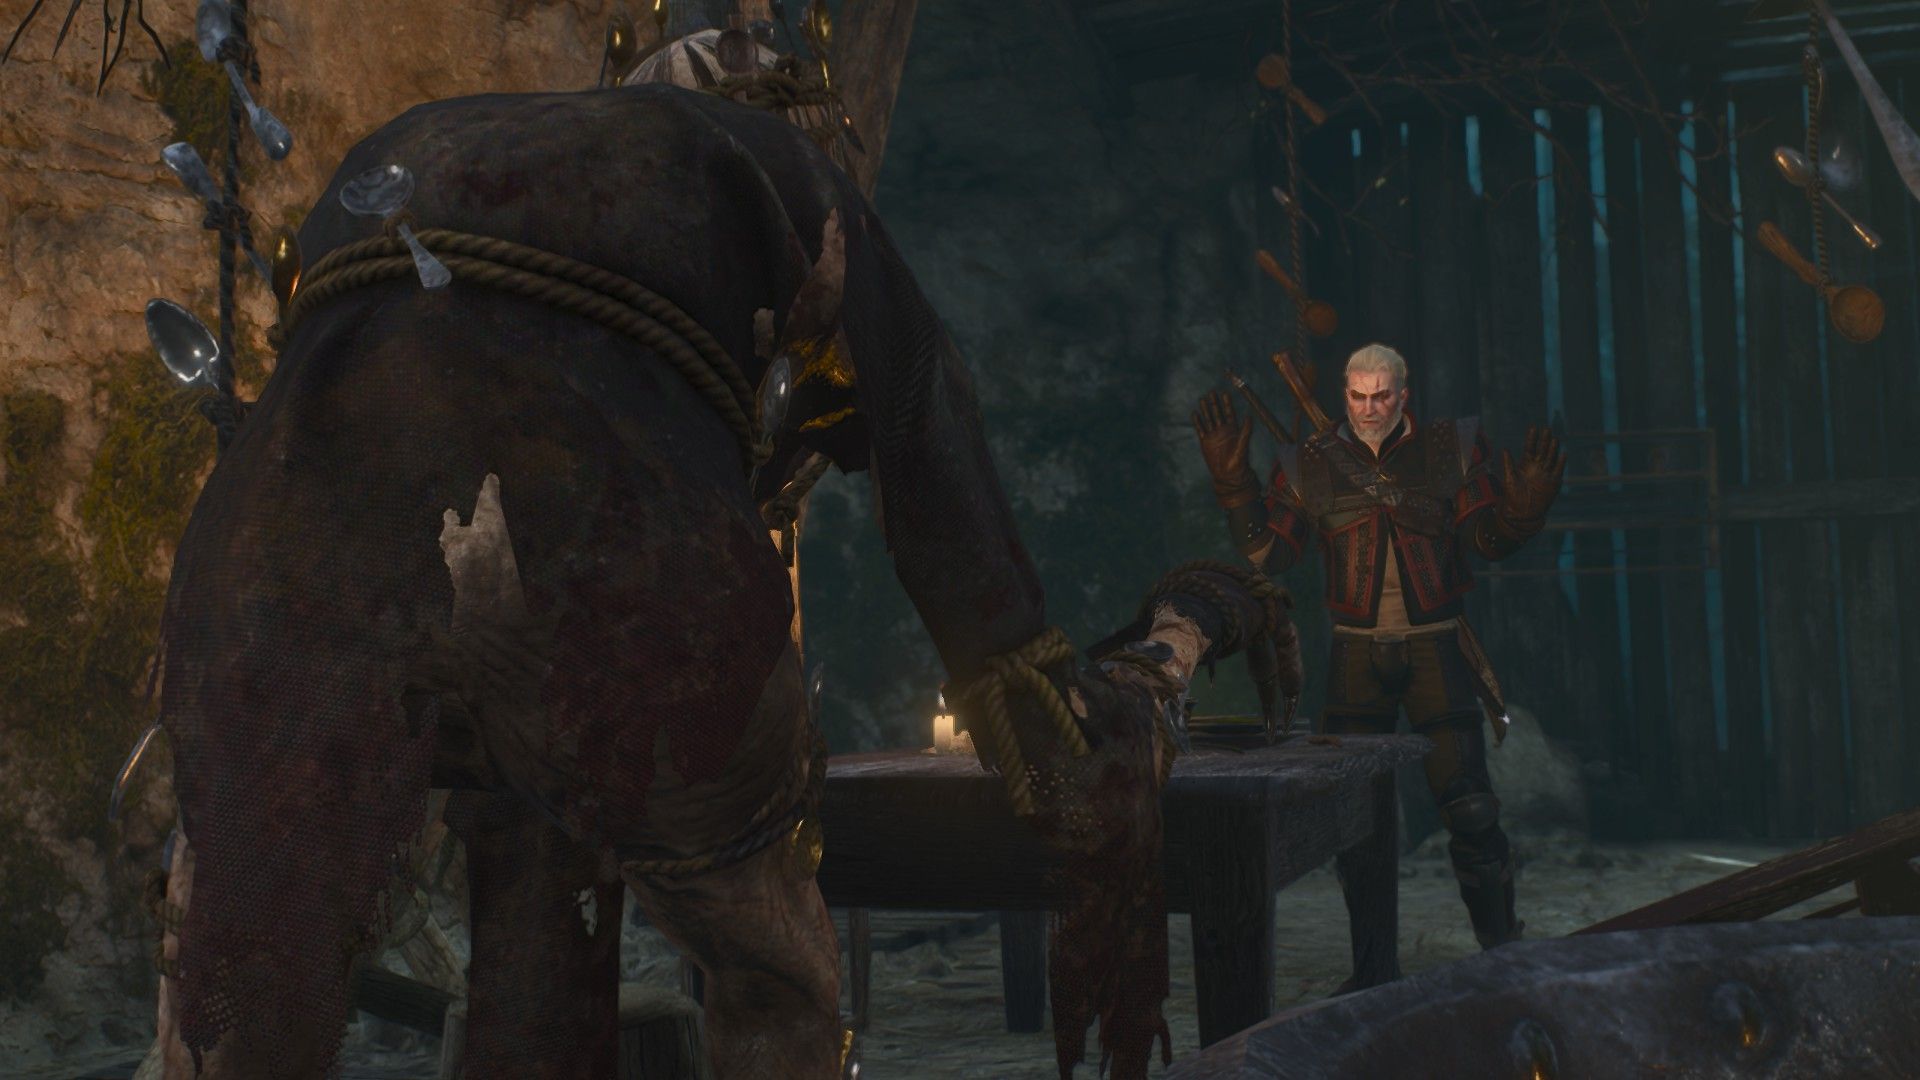 Geralt raises his hand and walks away to talk to the monster.